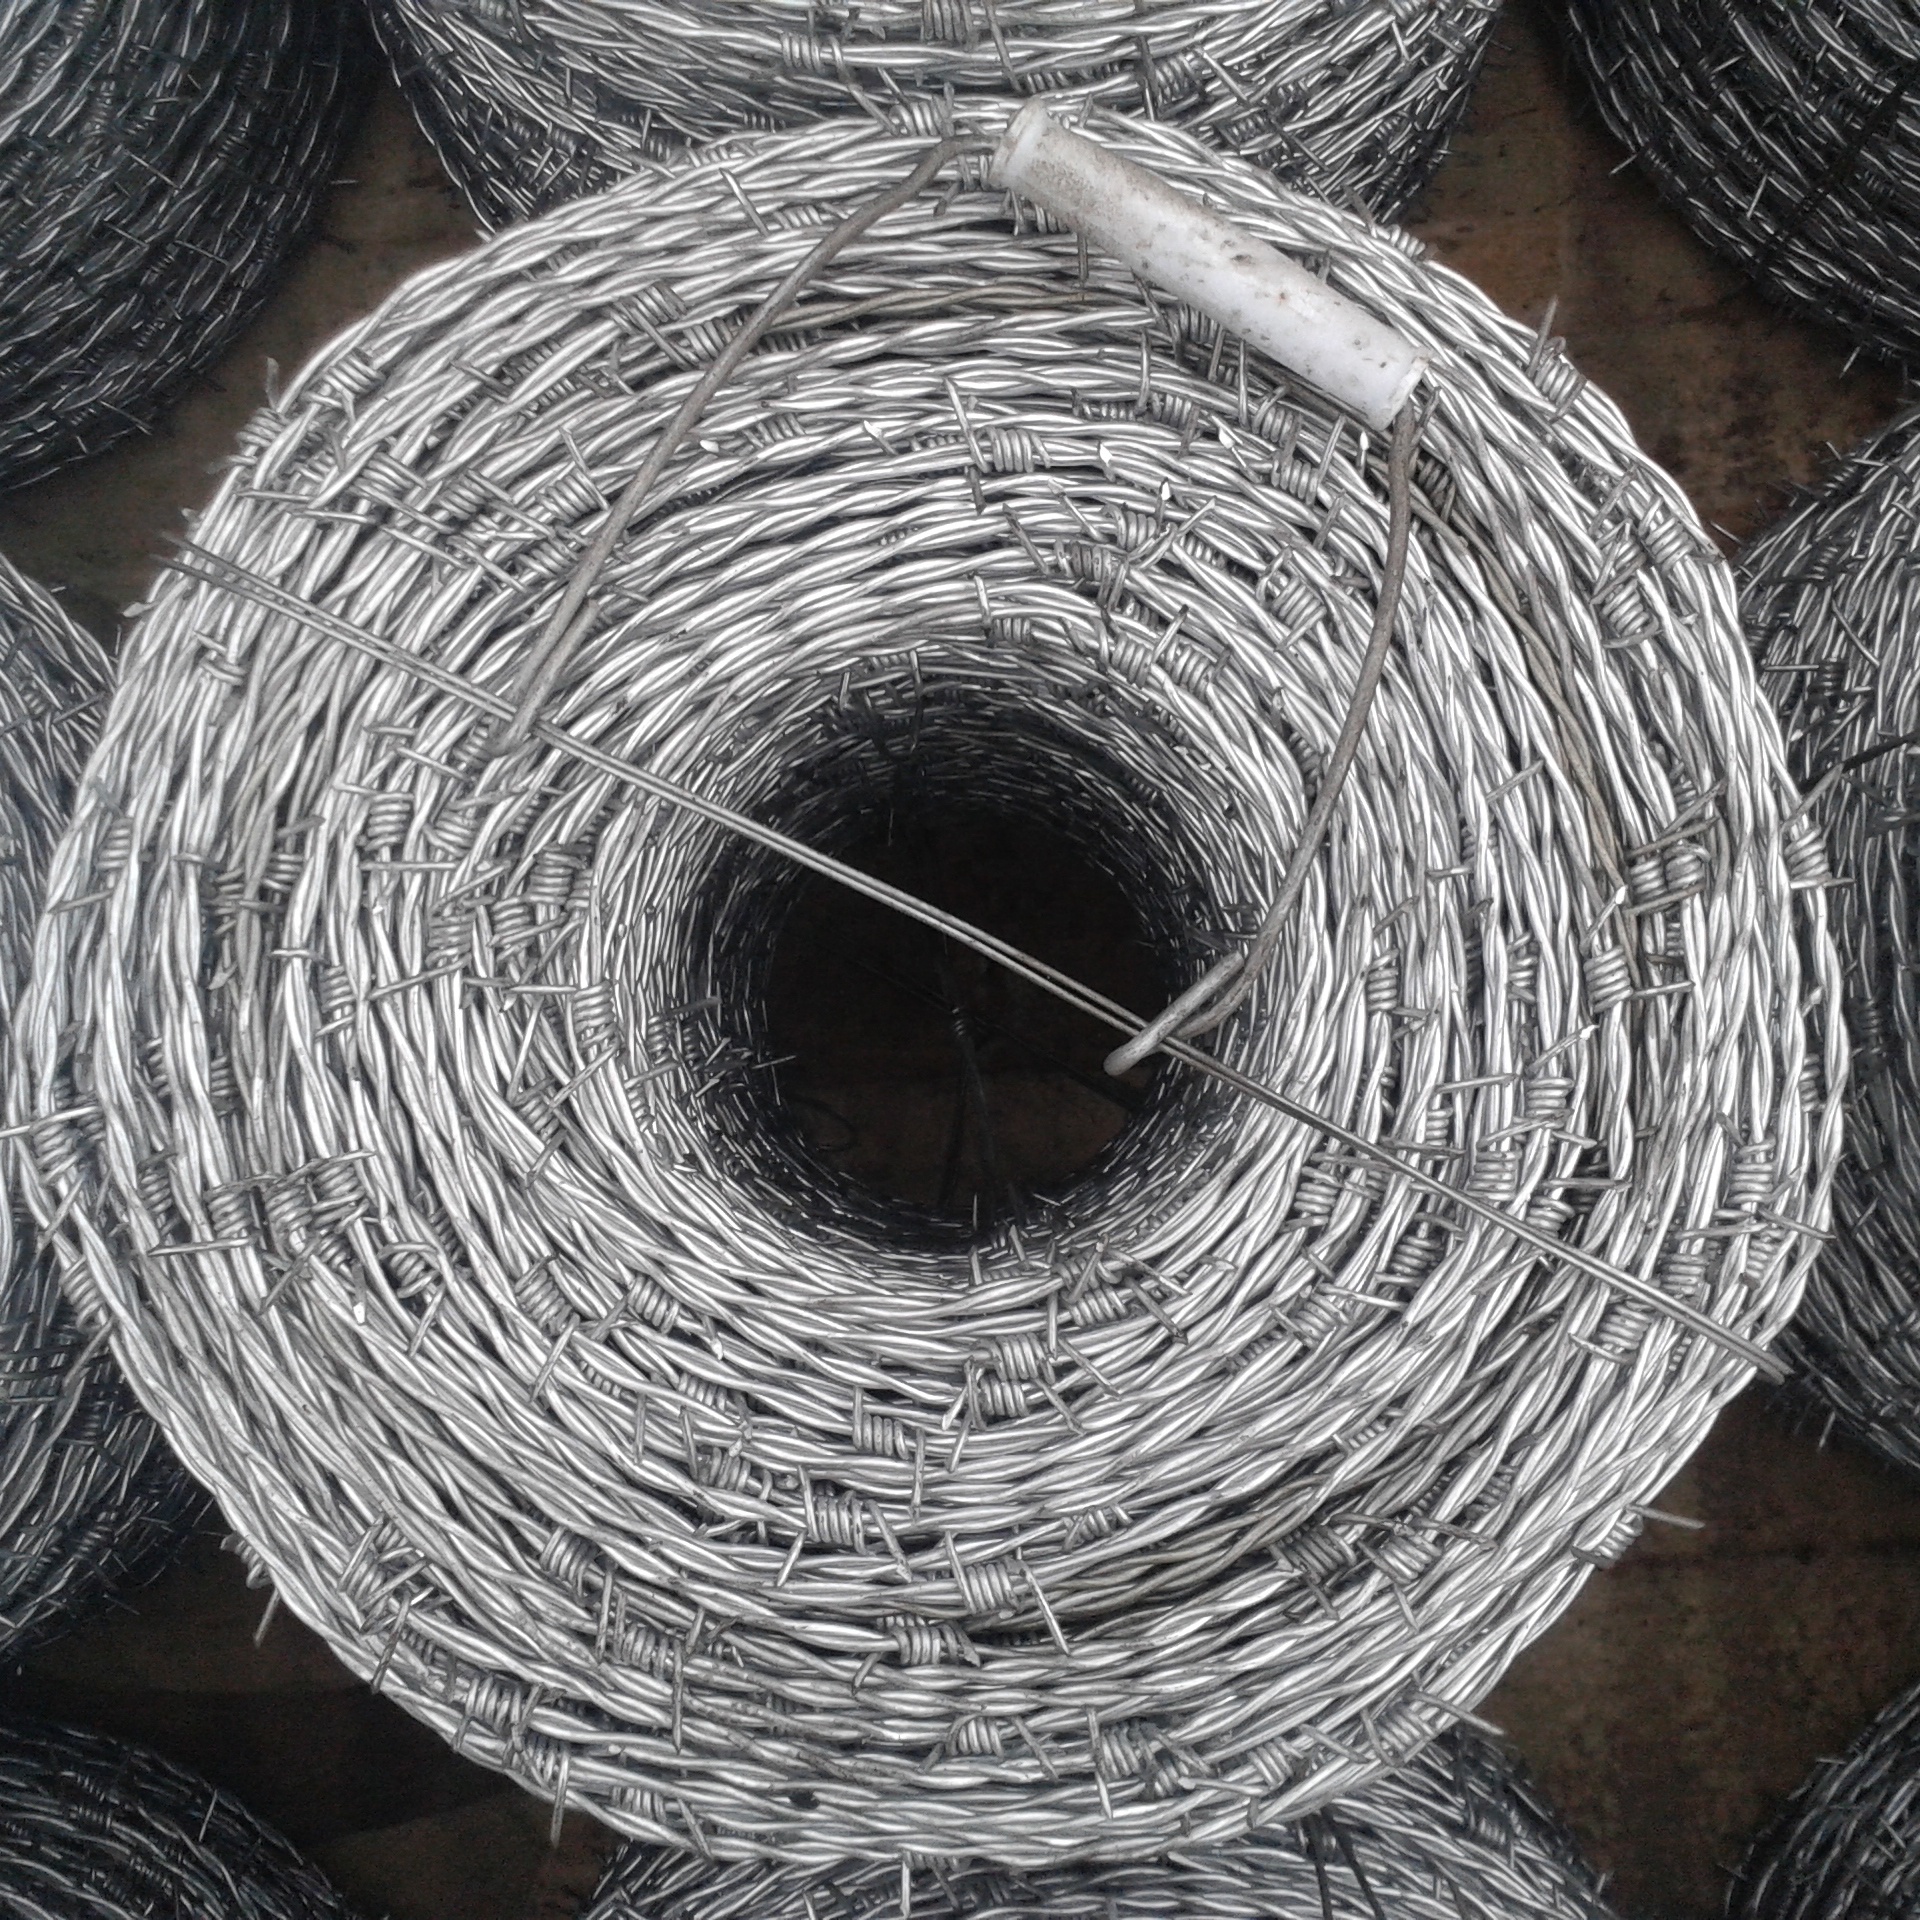 Hot Dipped Galvanized Barbed Wire In Low Price For Sale4